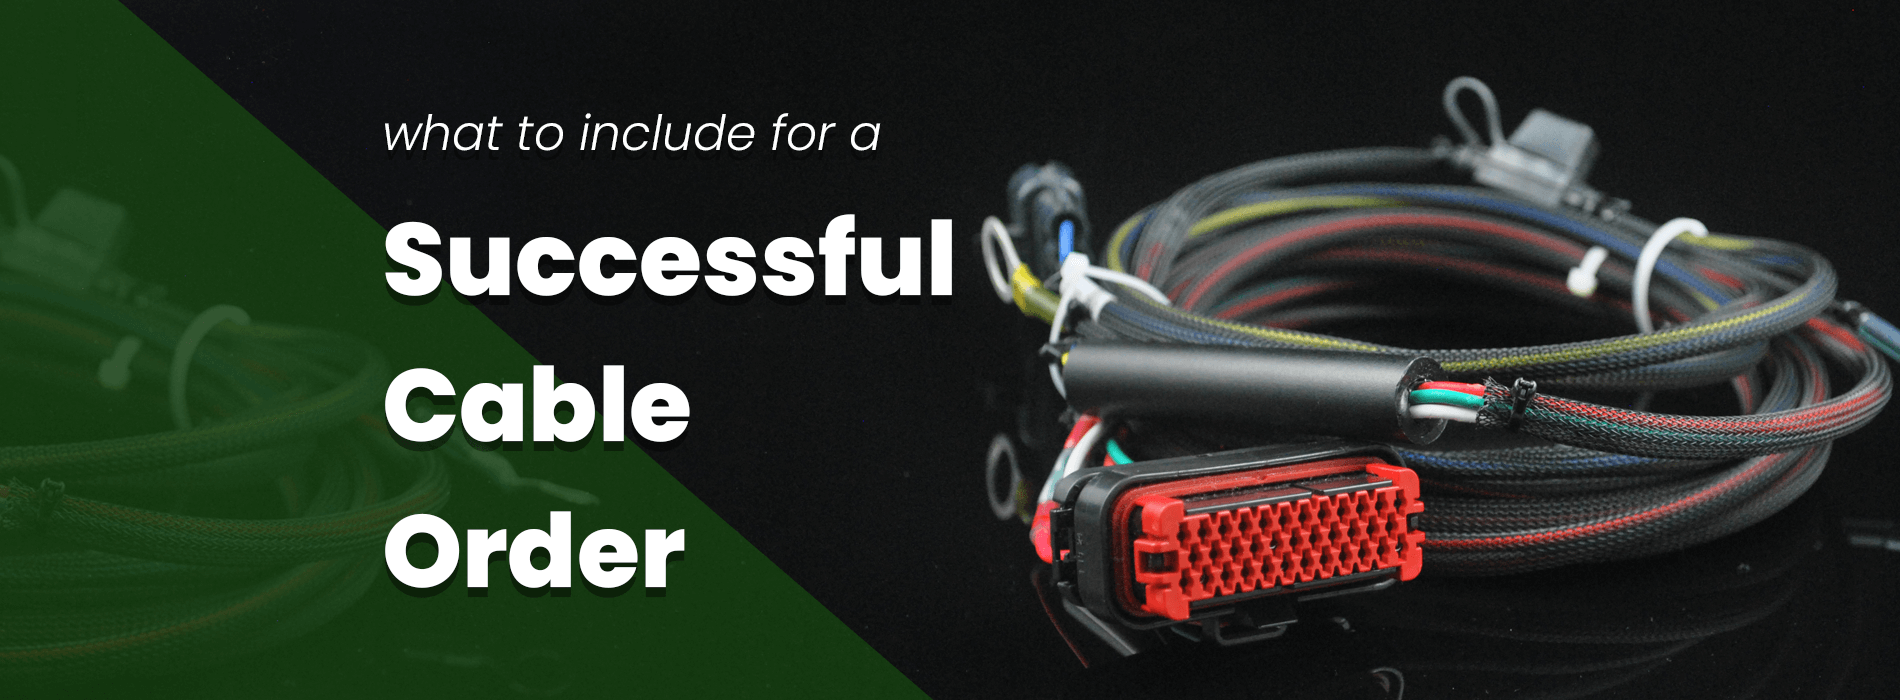 What to Include for a Successful Cable Order Header Image